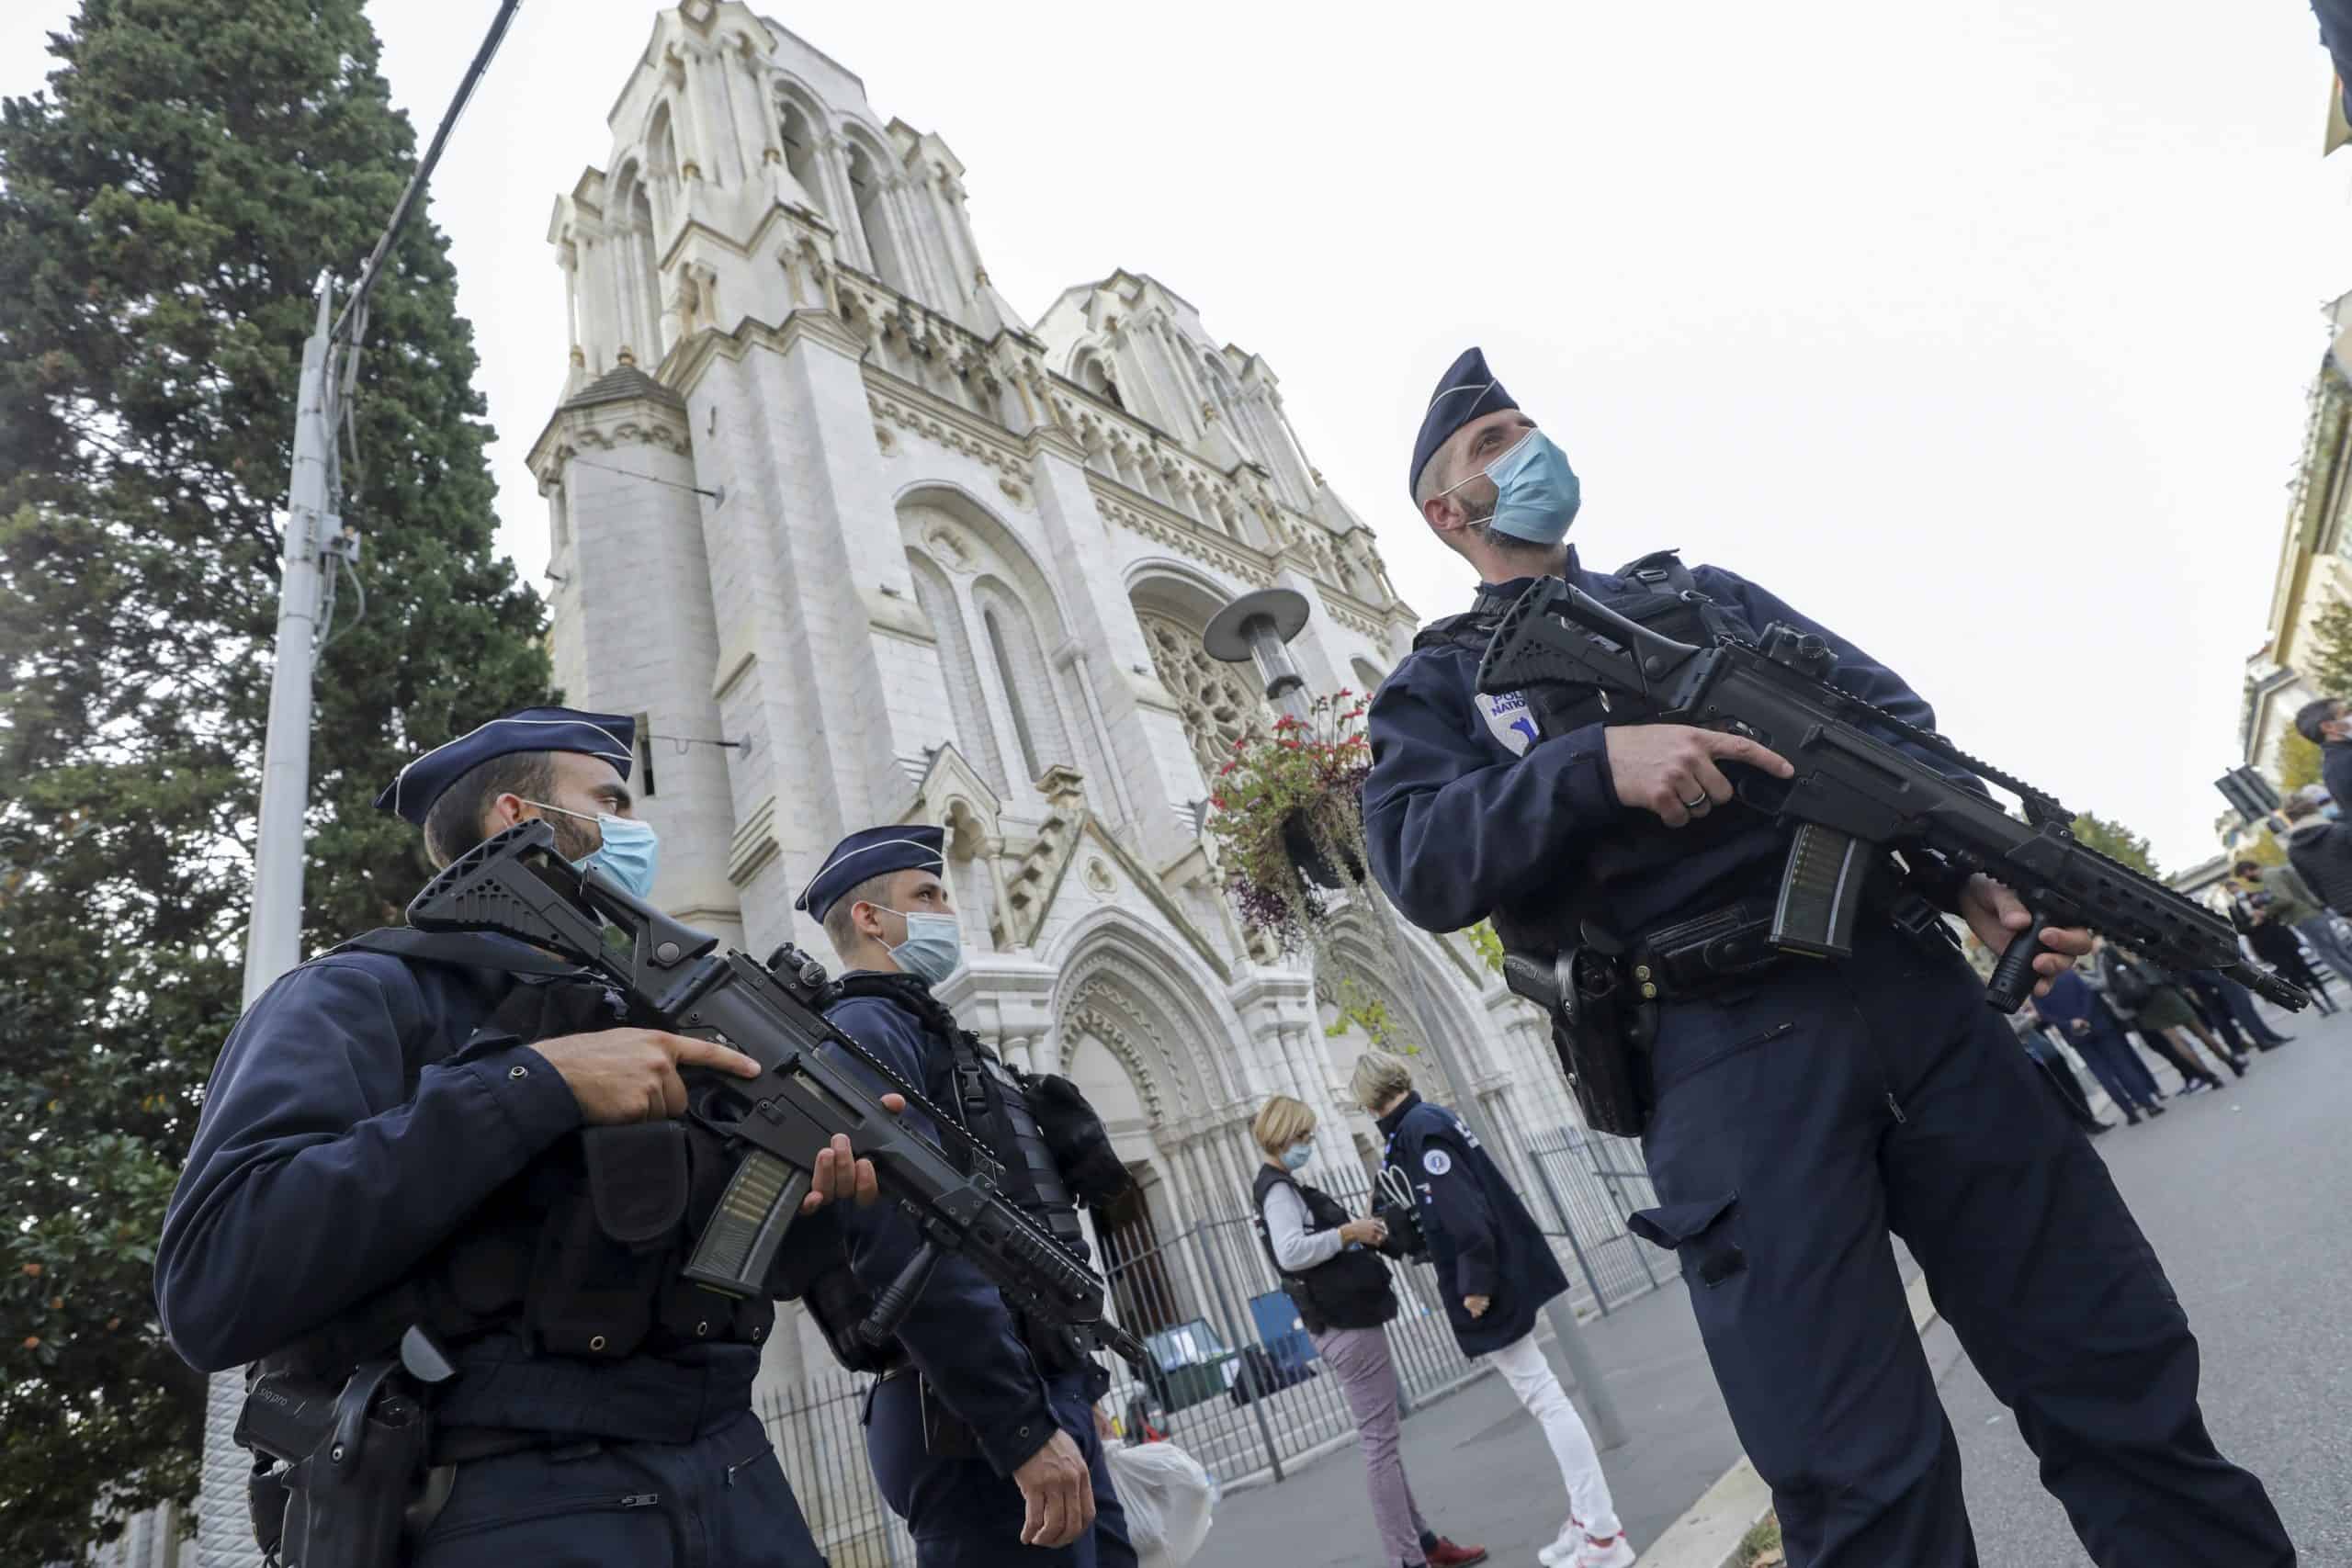 French Muslim men protect local church after spate of terror attacks